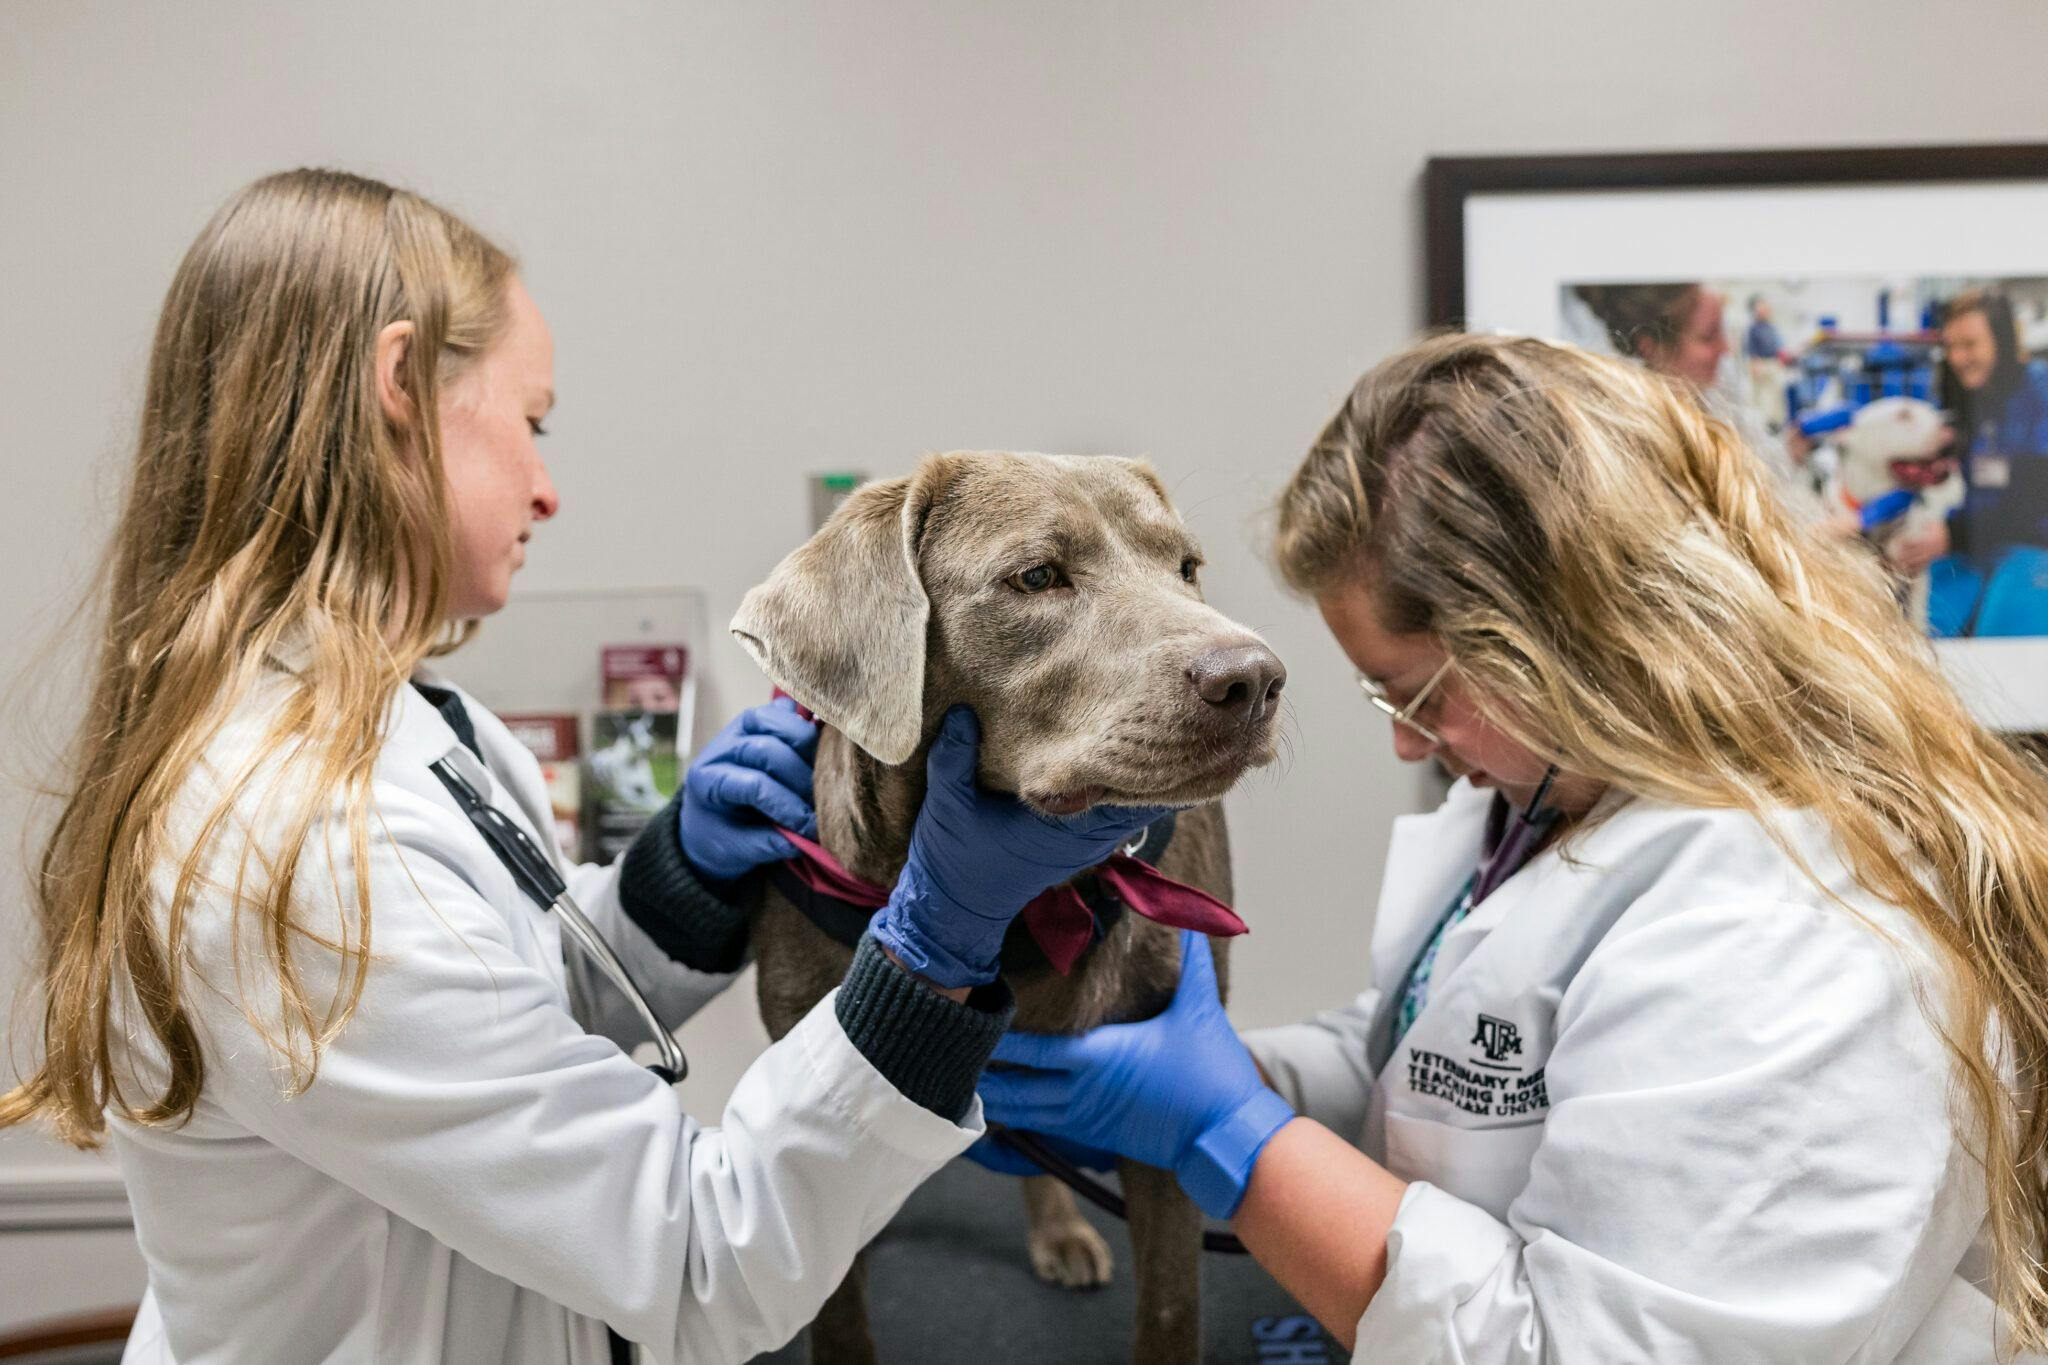 Lanie, an English silver Labrador retriever, being examined by veterinary professionals at the Small Animal Teaching Hospital at Texas A&M (Image courtesy of Jason Nitsch ’14, Texas A&M Division of Marketing and Communications)